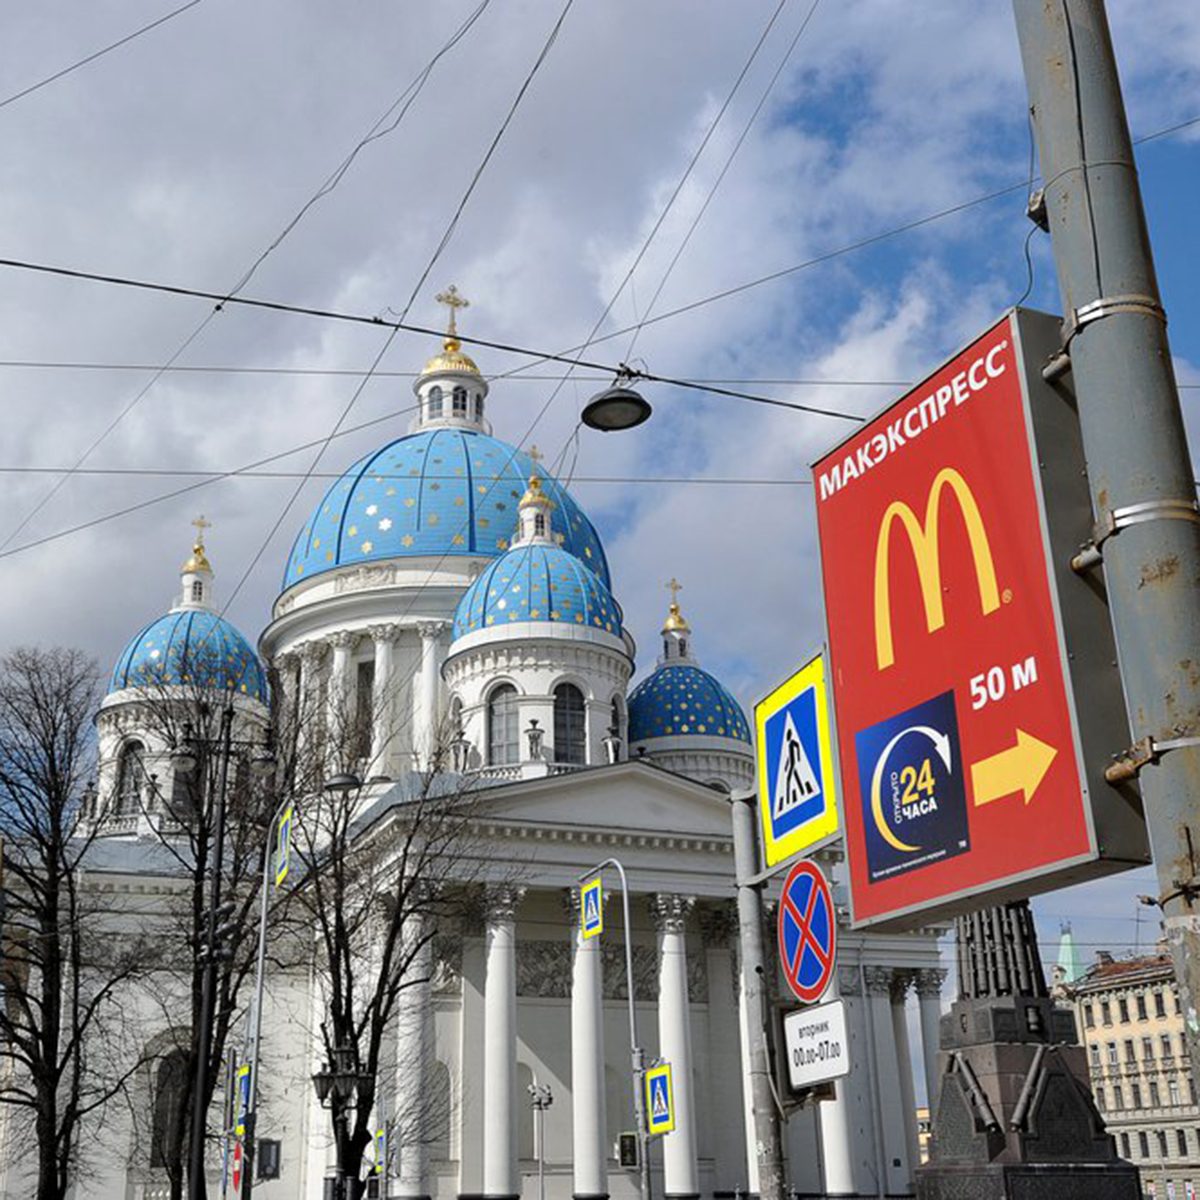 A pointer to the McDonald's in St Petersburg Russia